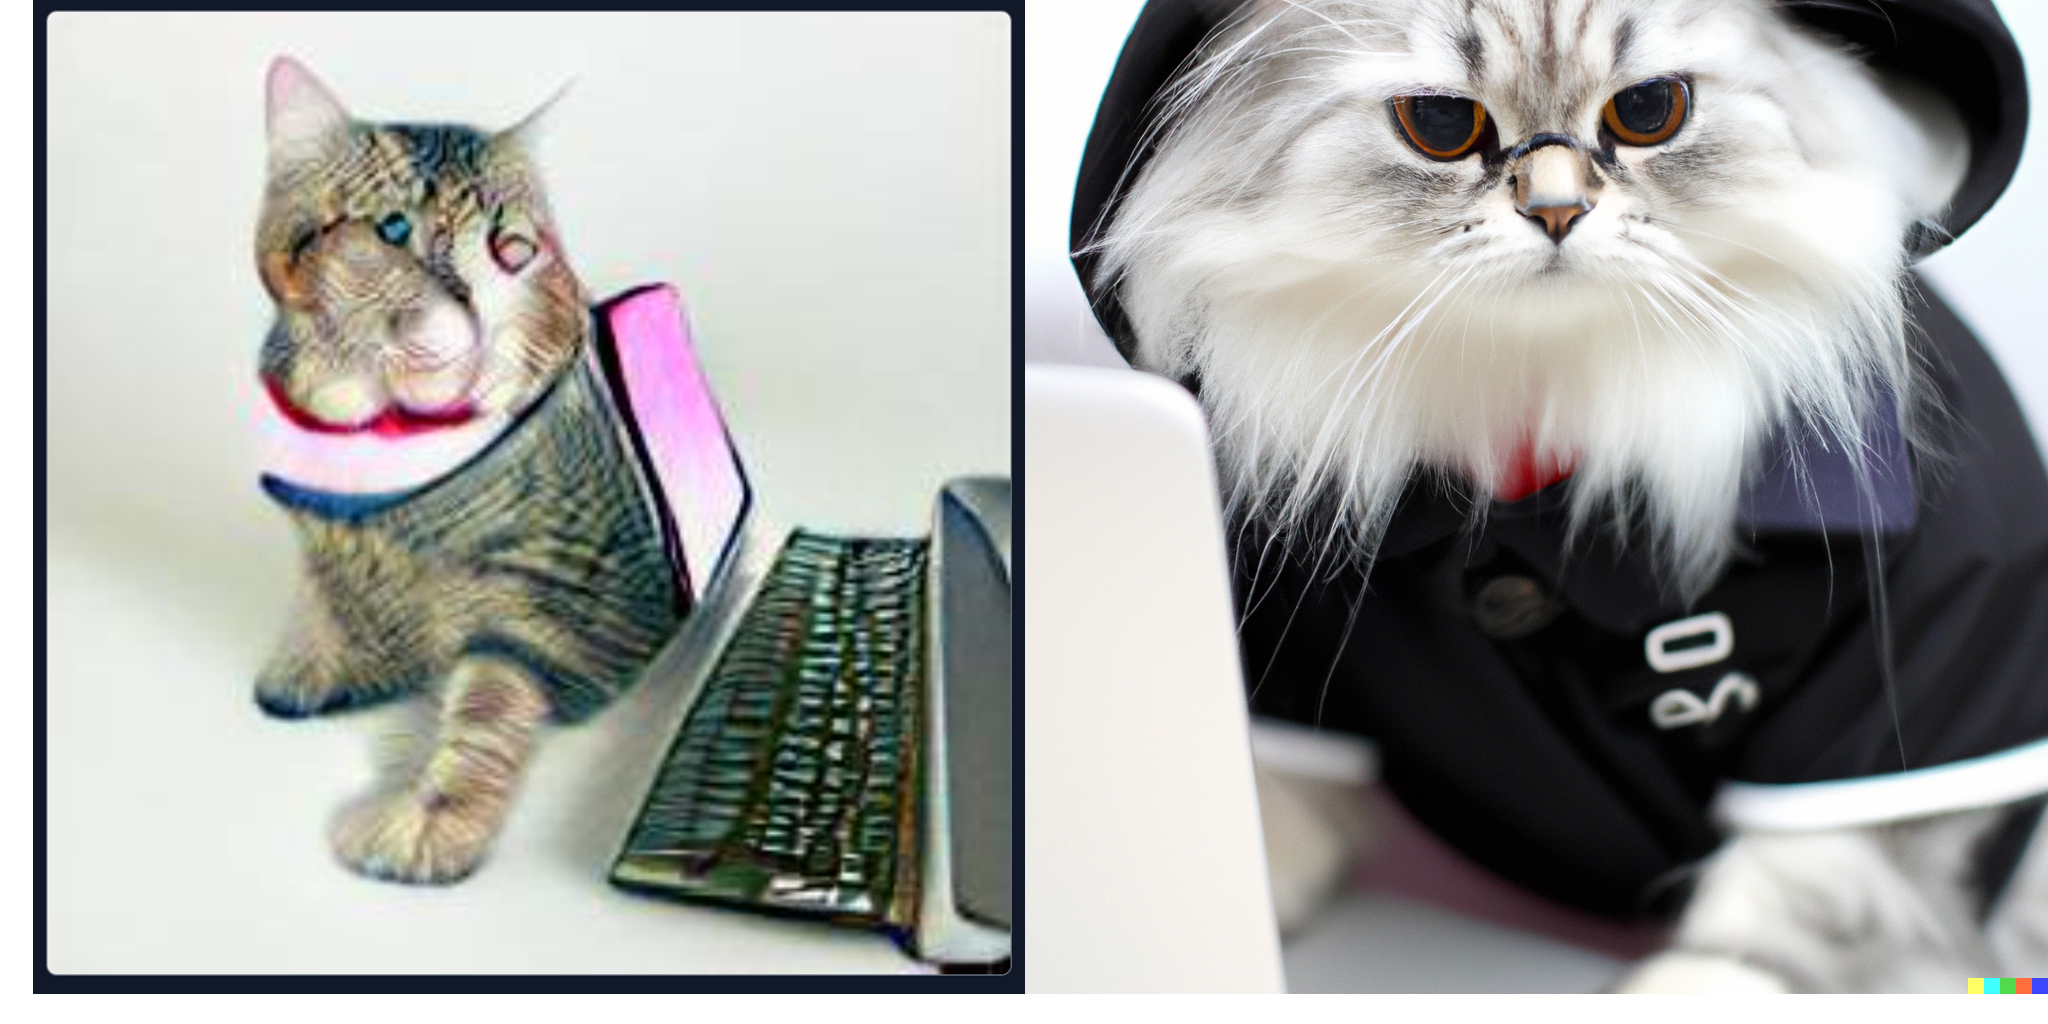 Two cats dressed as computer programmers generated by different AI software.